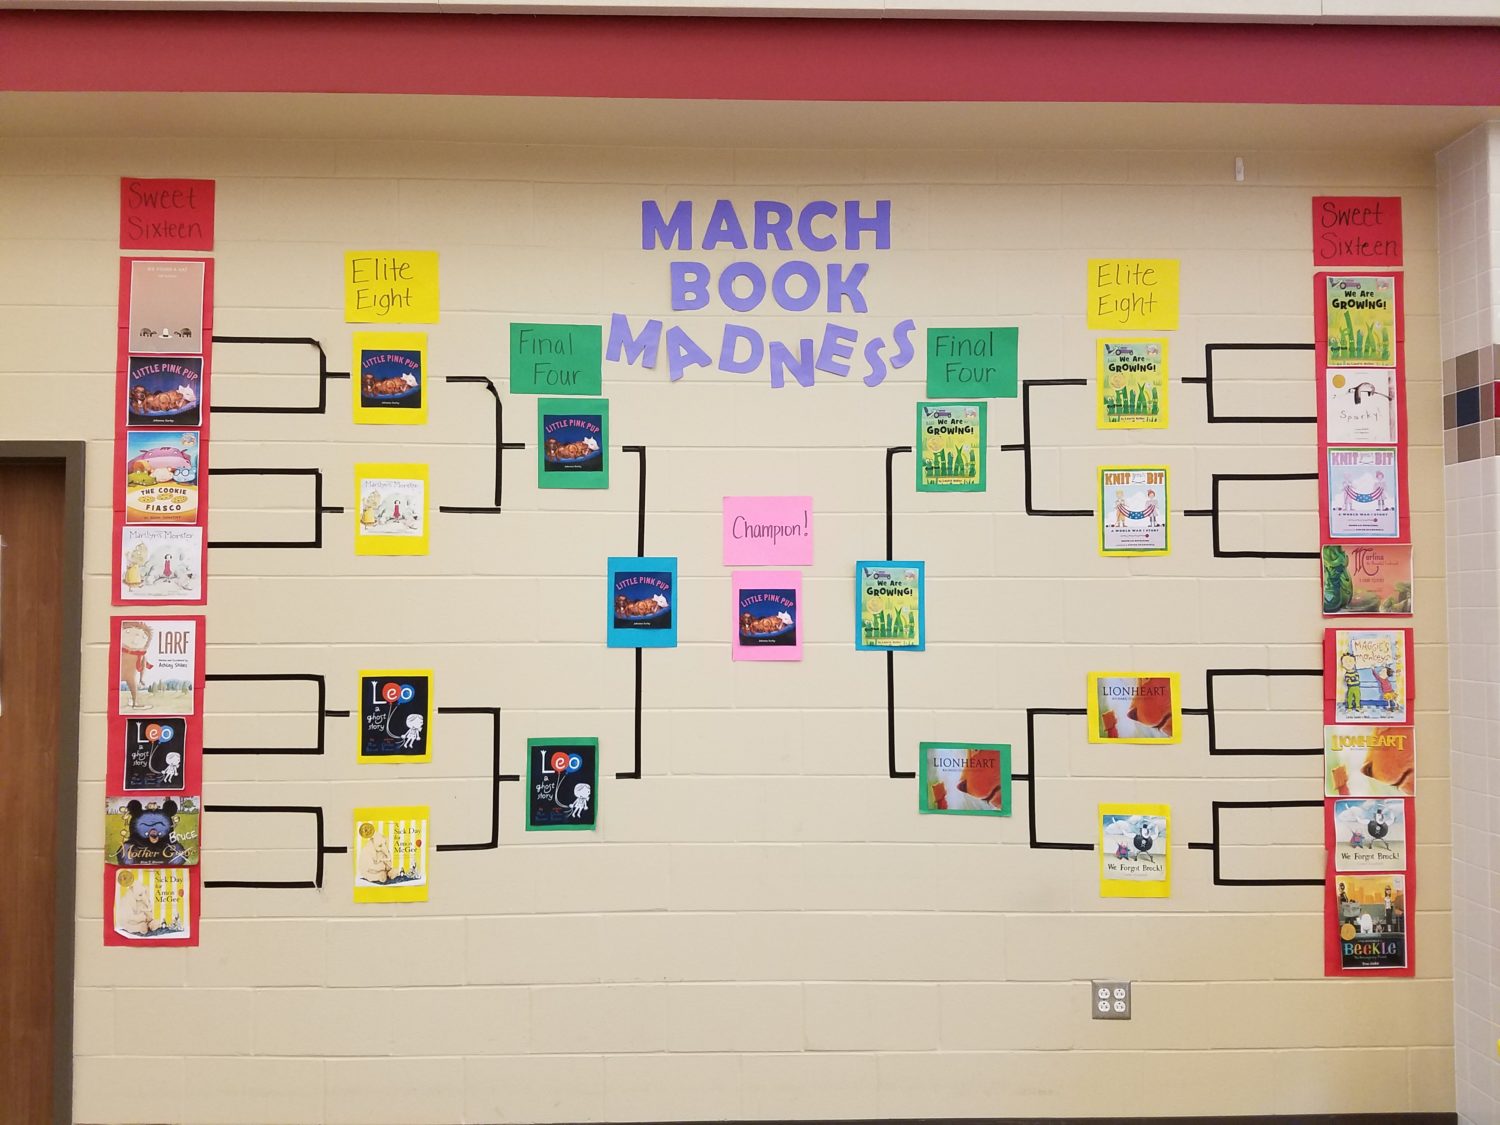 Our March Book Madness Tournament Bracket